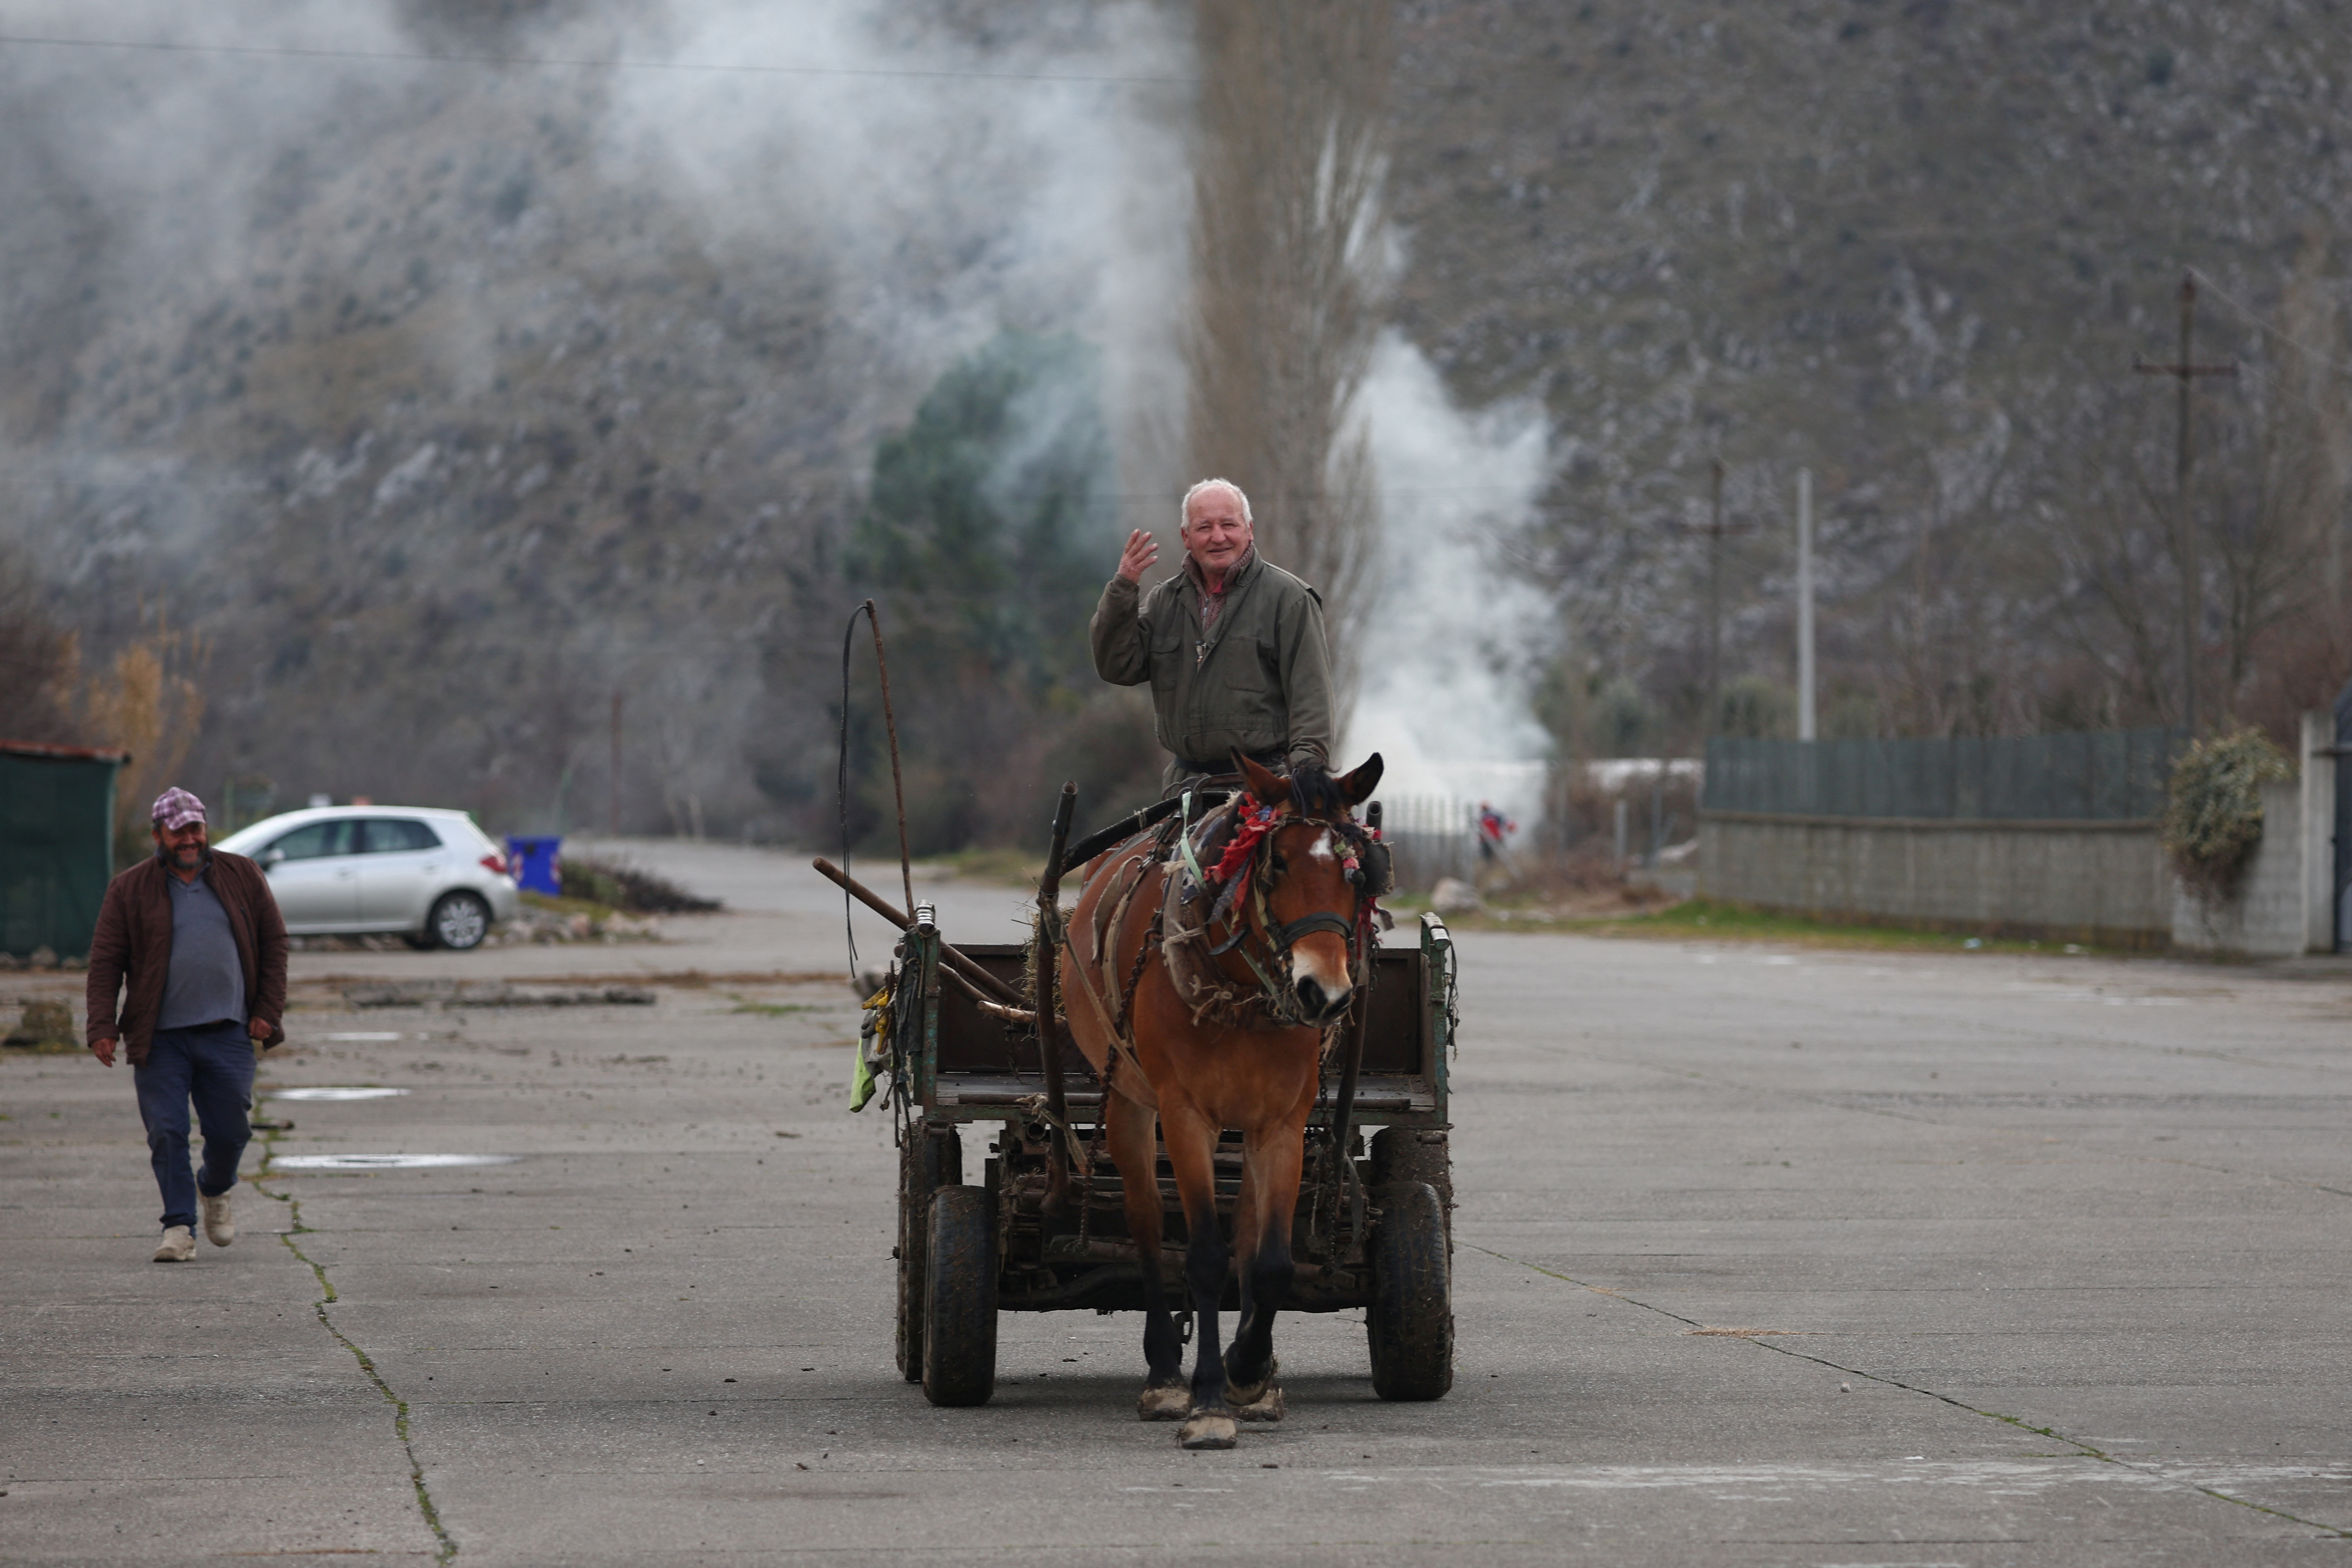 A local man riding a horse gestures on a former runaway of a military airport, in Gjader